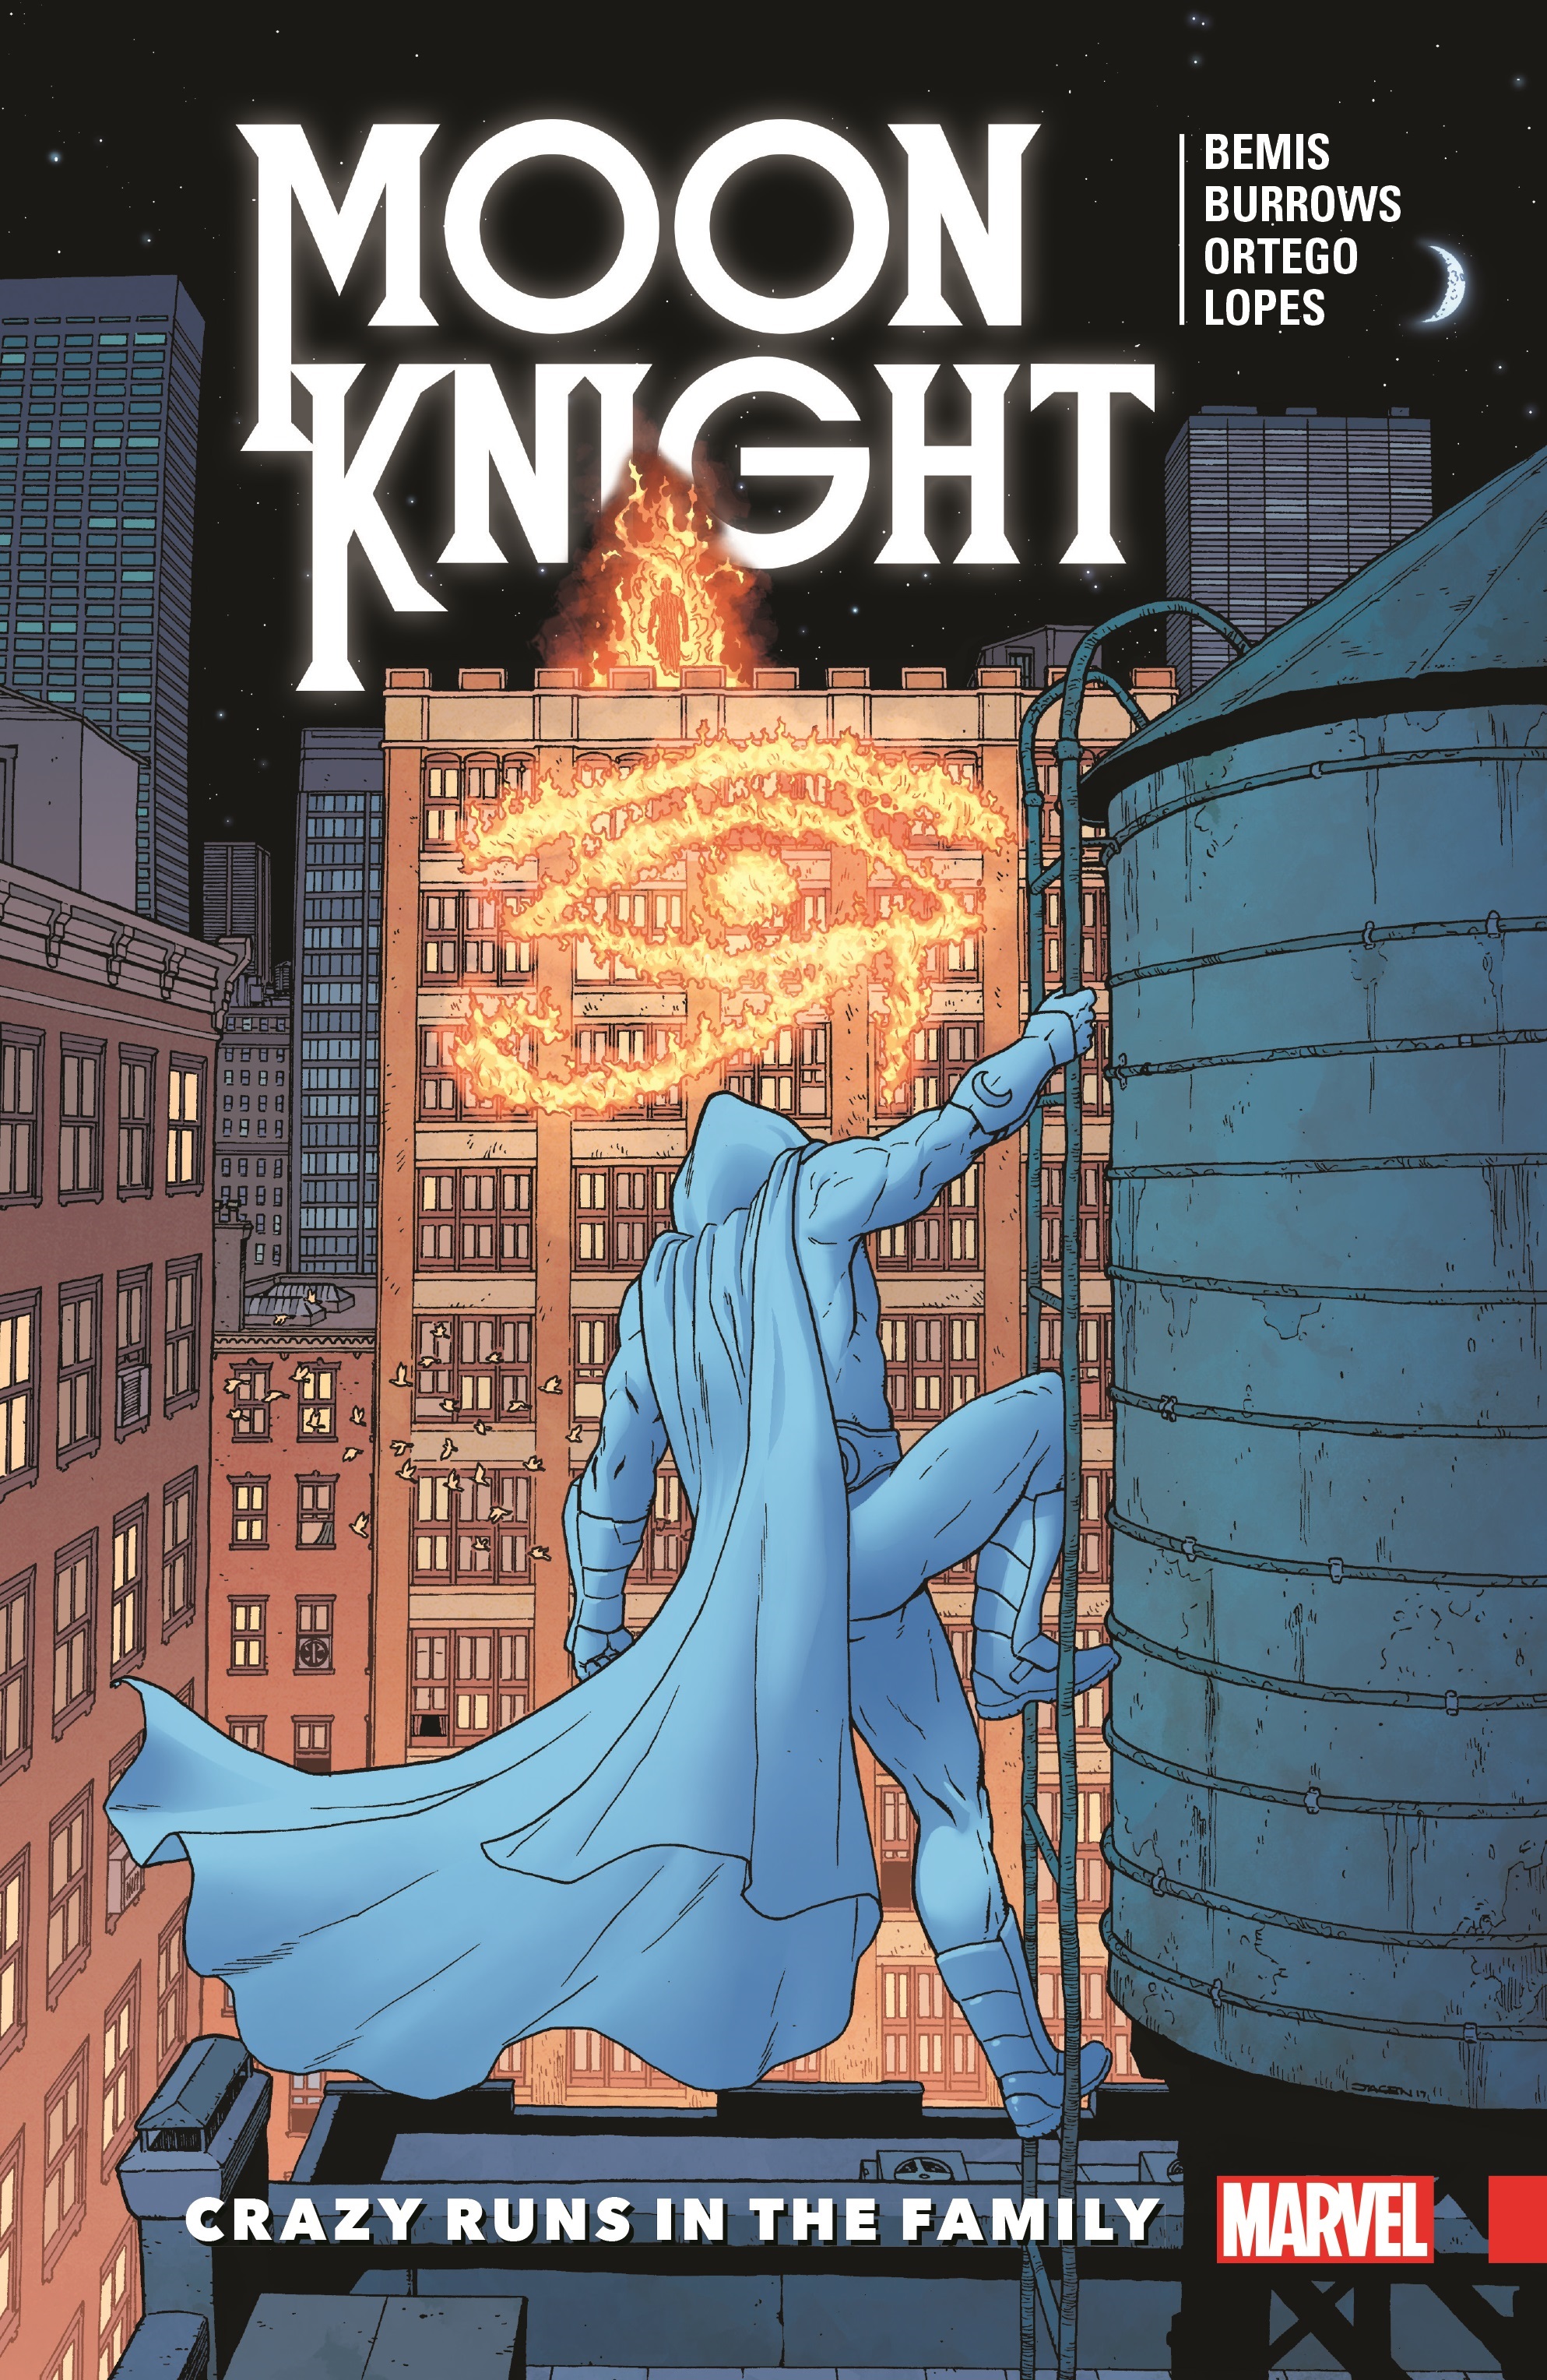 Moon Knight: Legacy Vol. 1 - Crazy Runs In The Family (Trade Paperback)